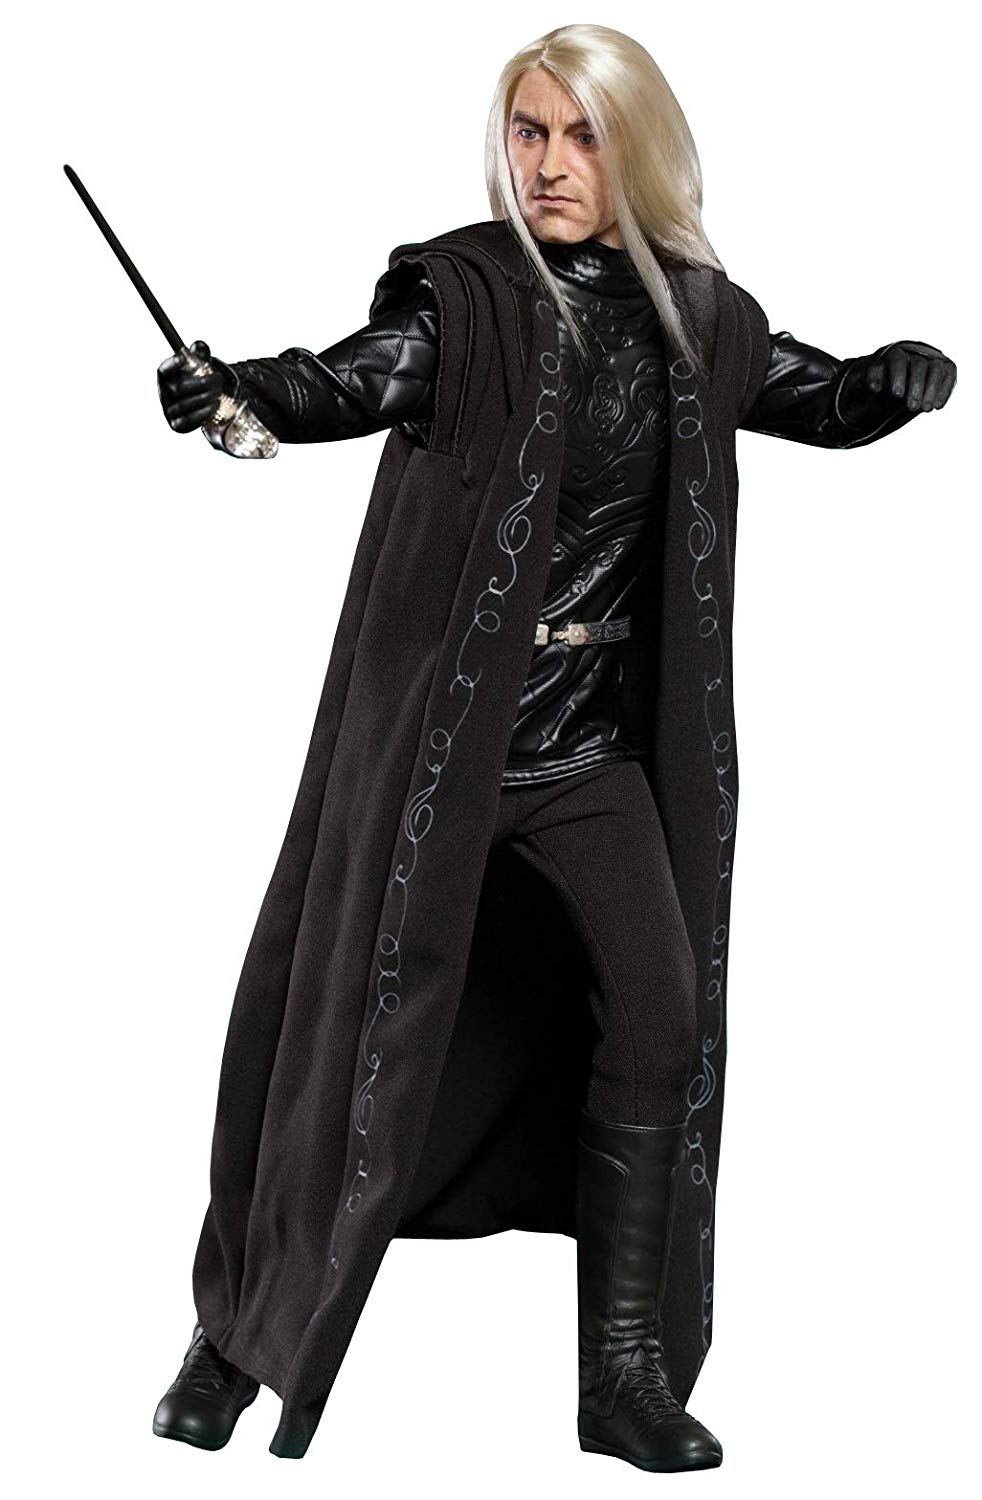 STAR ACE TOYS MY FAVORITE MOVIE SERIES HARRY POTTER AND THE GOBLET OF FIRE 1/6 COLLECTIBLE ACTION FIGURE: LUCIUS MALFOY Star Ace Toys